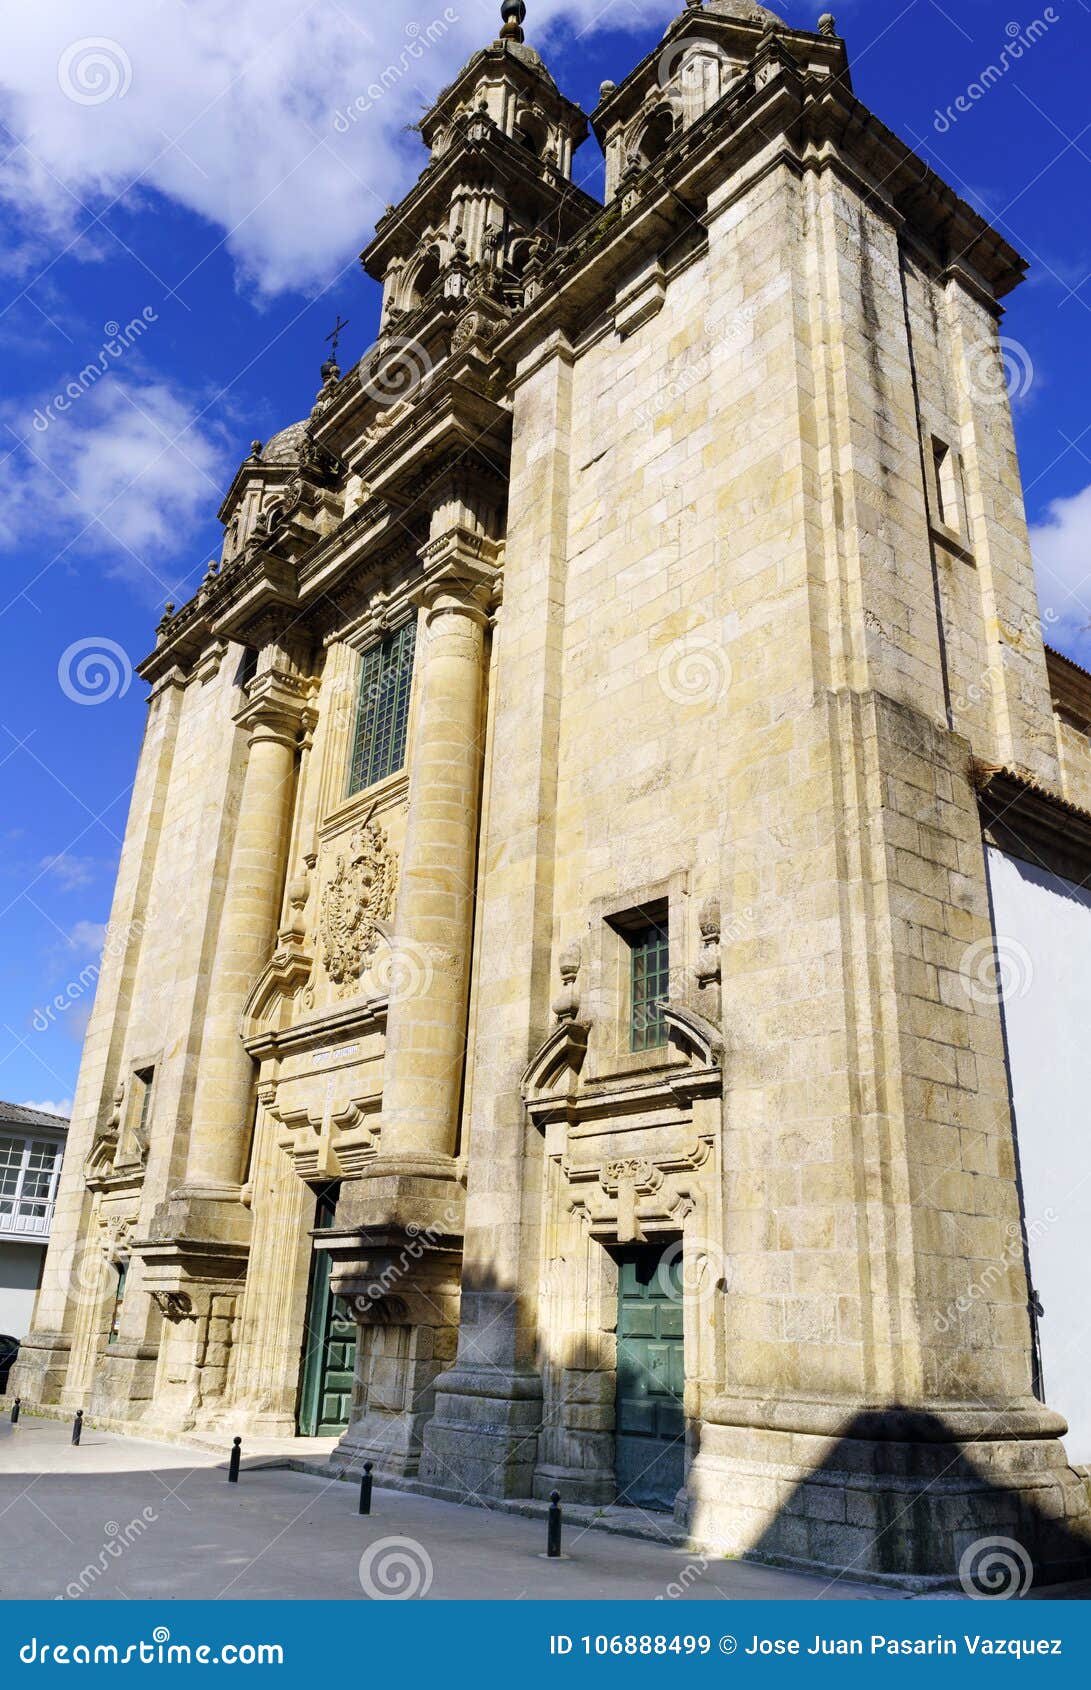 facade of the parish church of santiago in neoclassical style wi